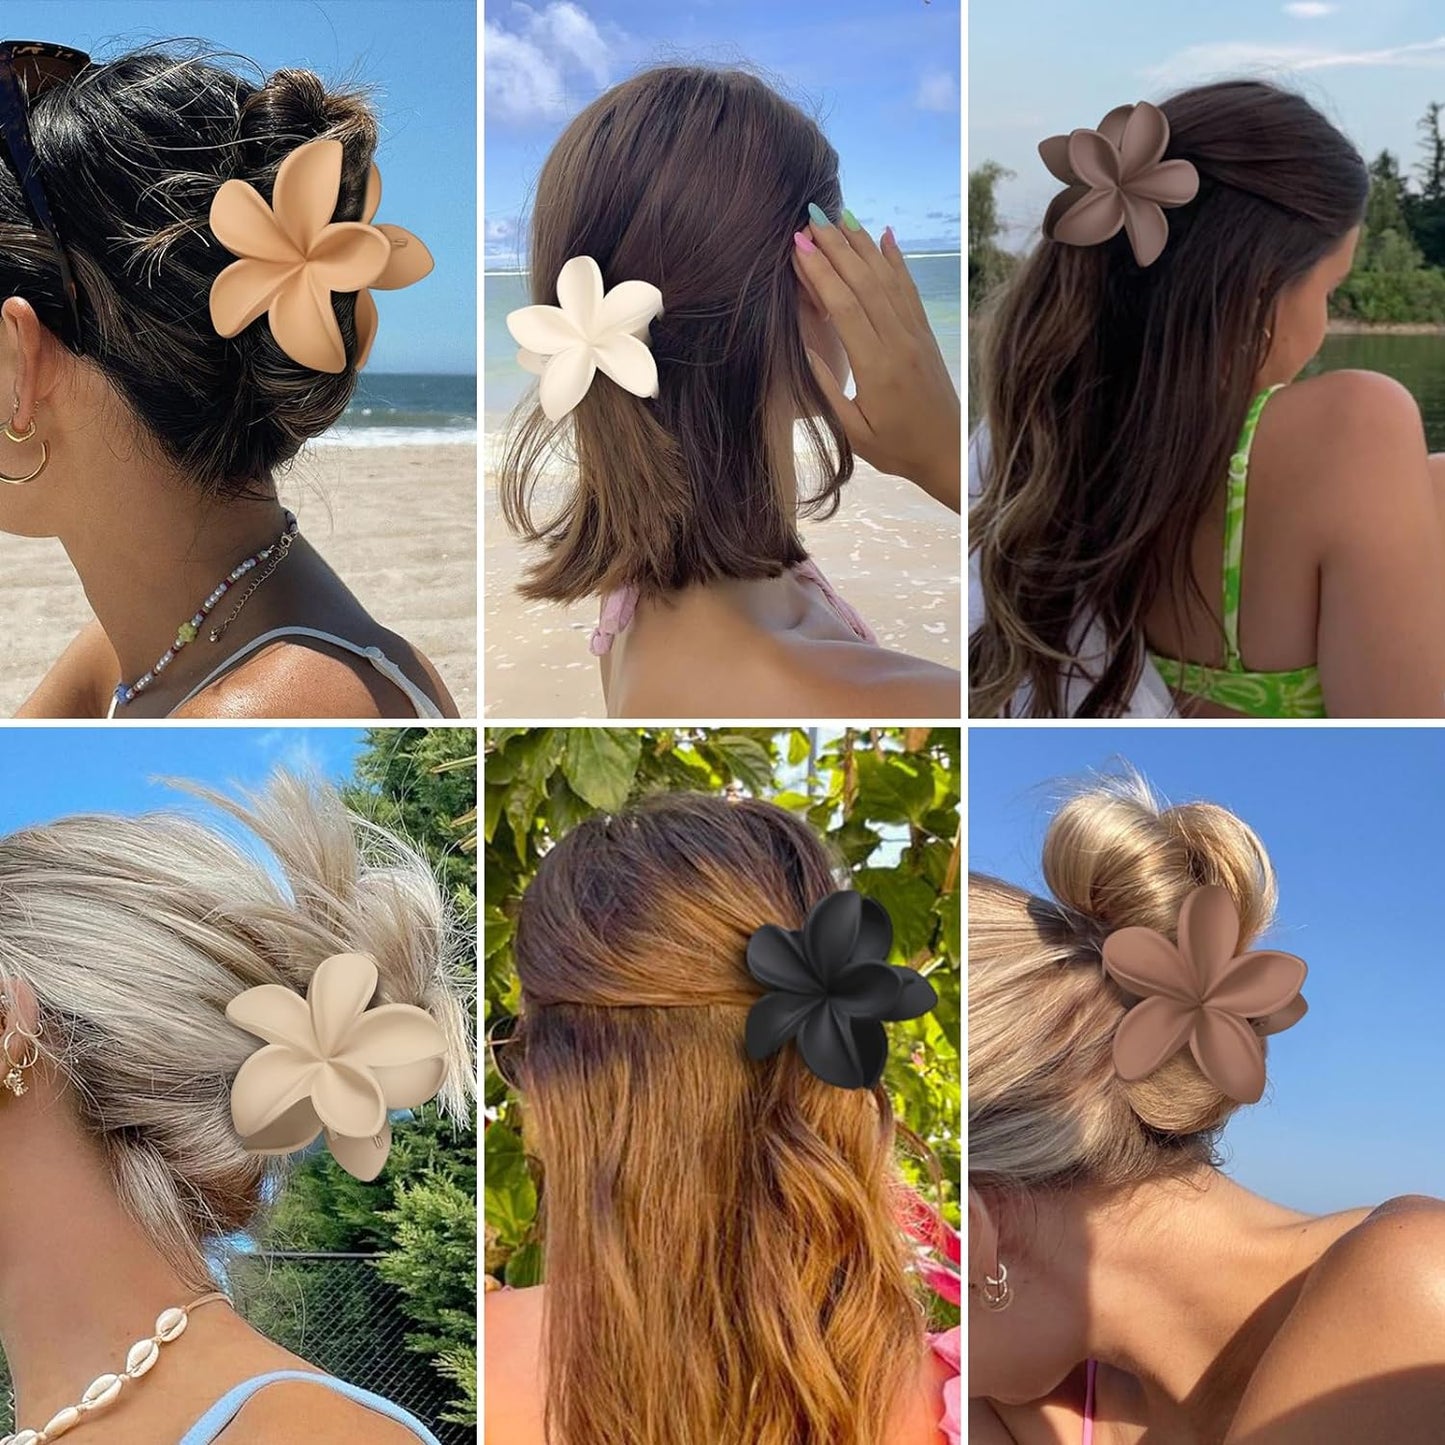 6 Pcs Large Flower Hair Claw Clips for Thick Hair Hawaiian Flower Hair Clips for Women Girls